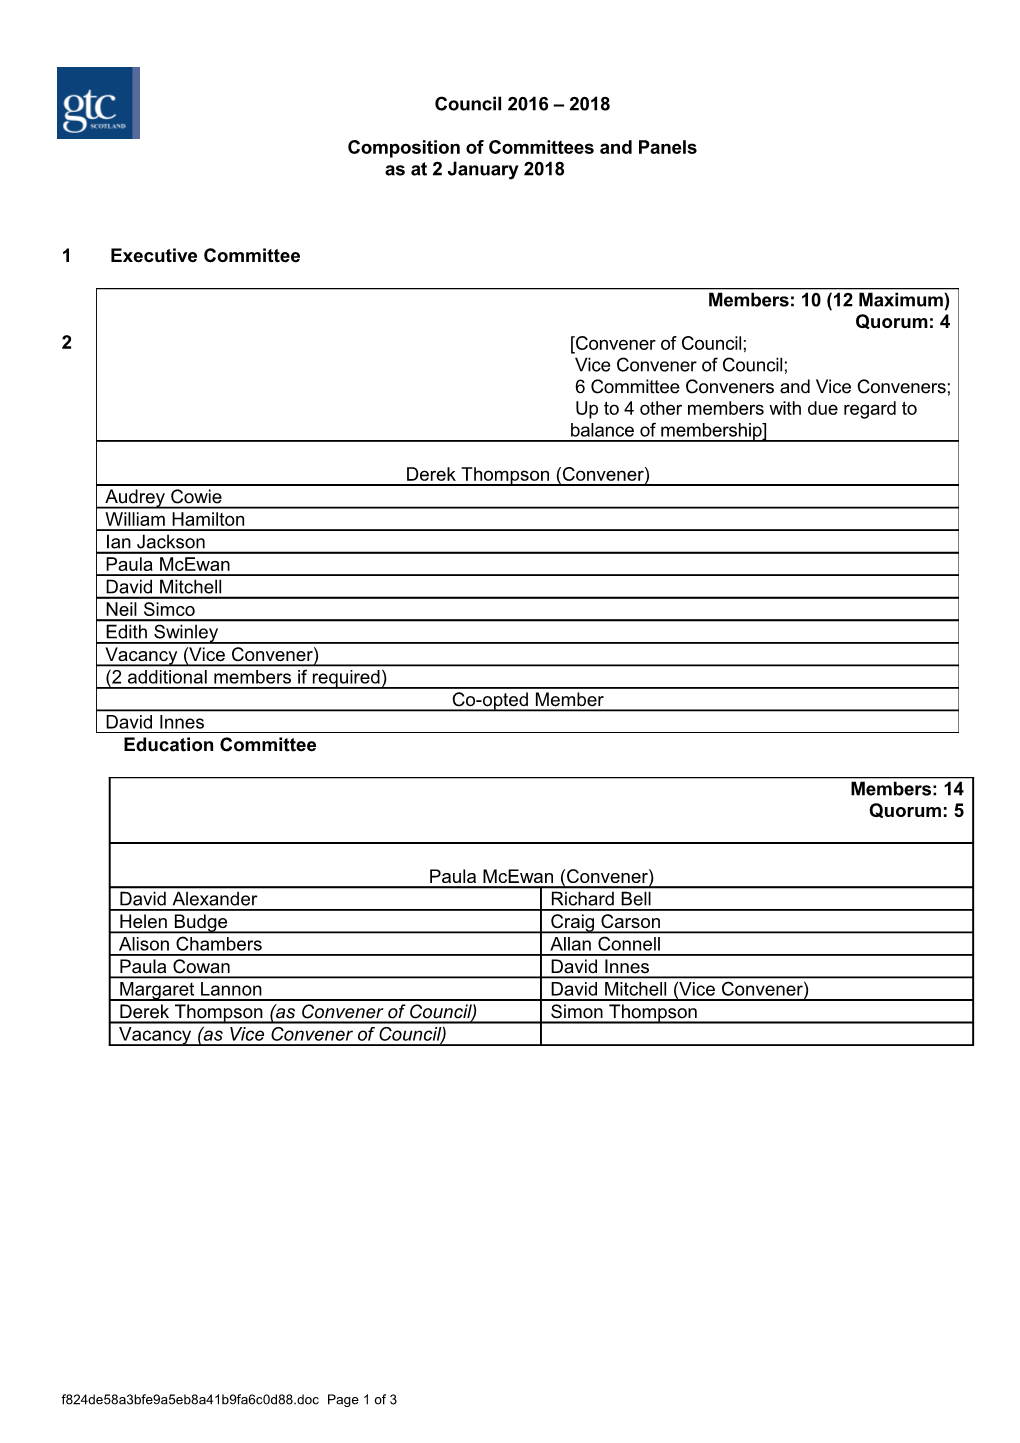 Composition of Committees and Panels